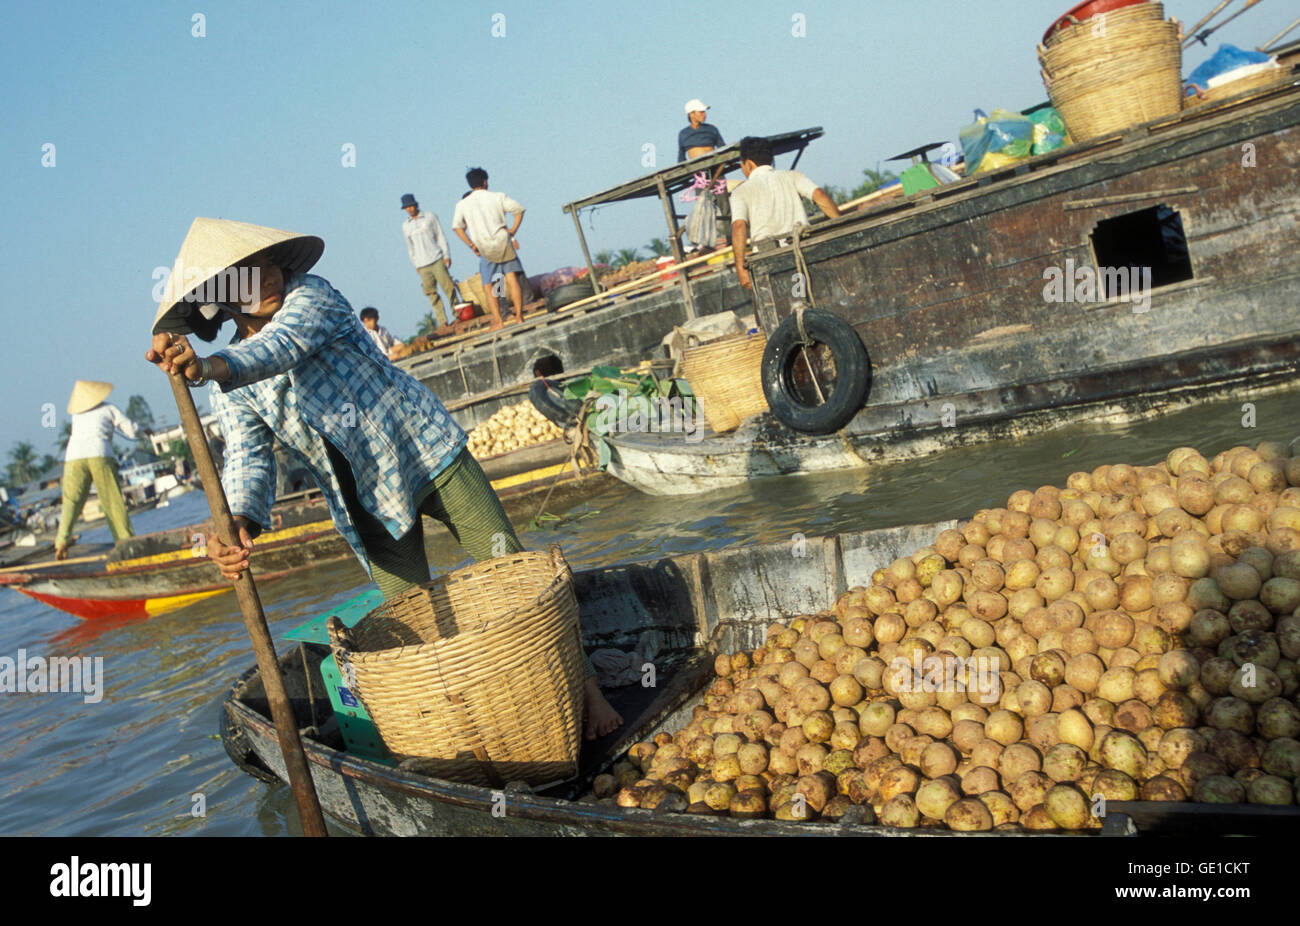 People at the Flooting Market on the Mekong River near the city of Can Tho in the Mekong Delta in Vietnam Stock Photo